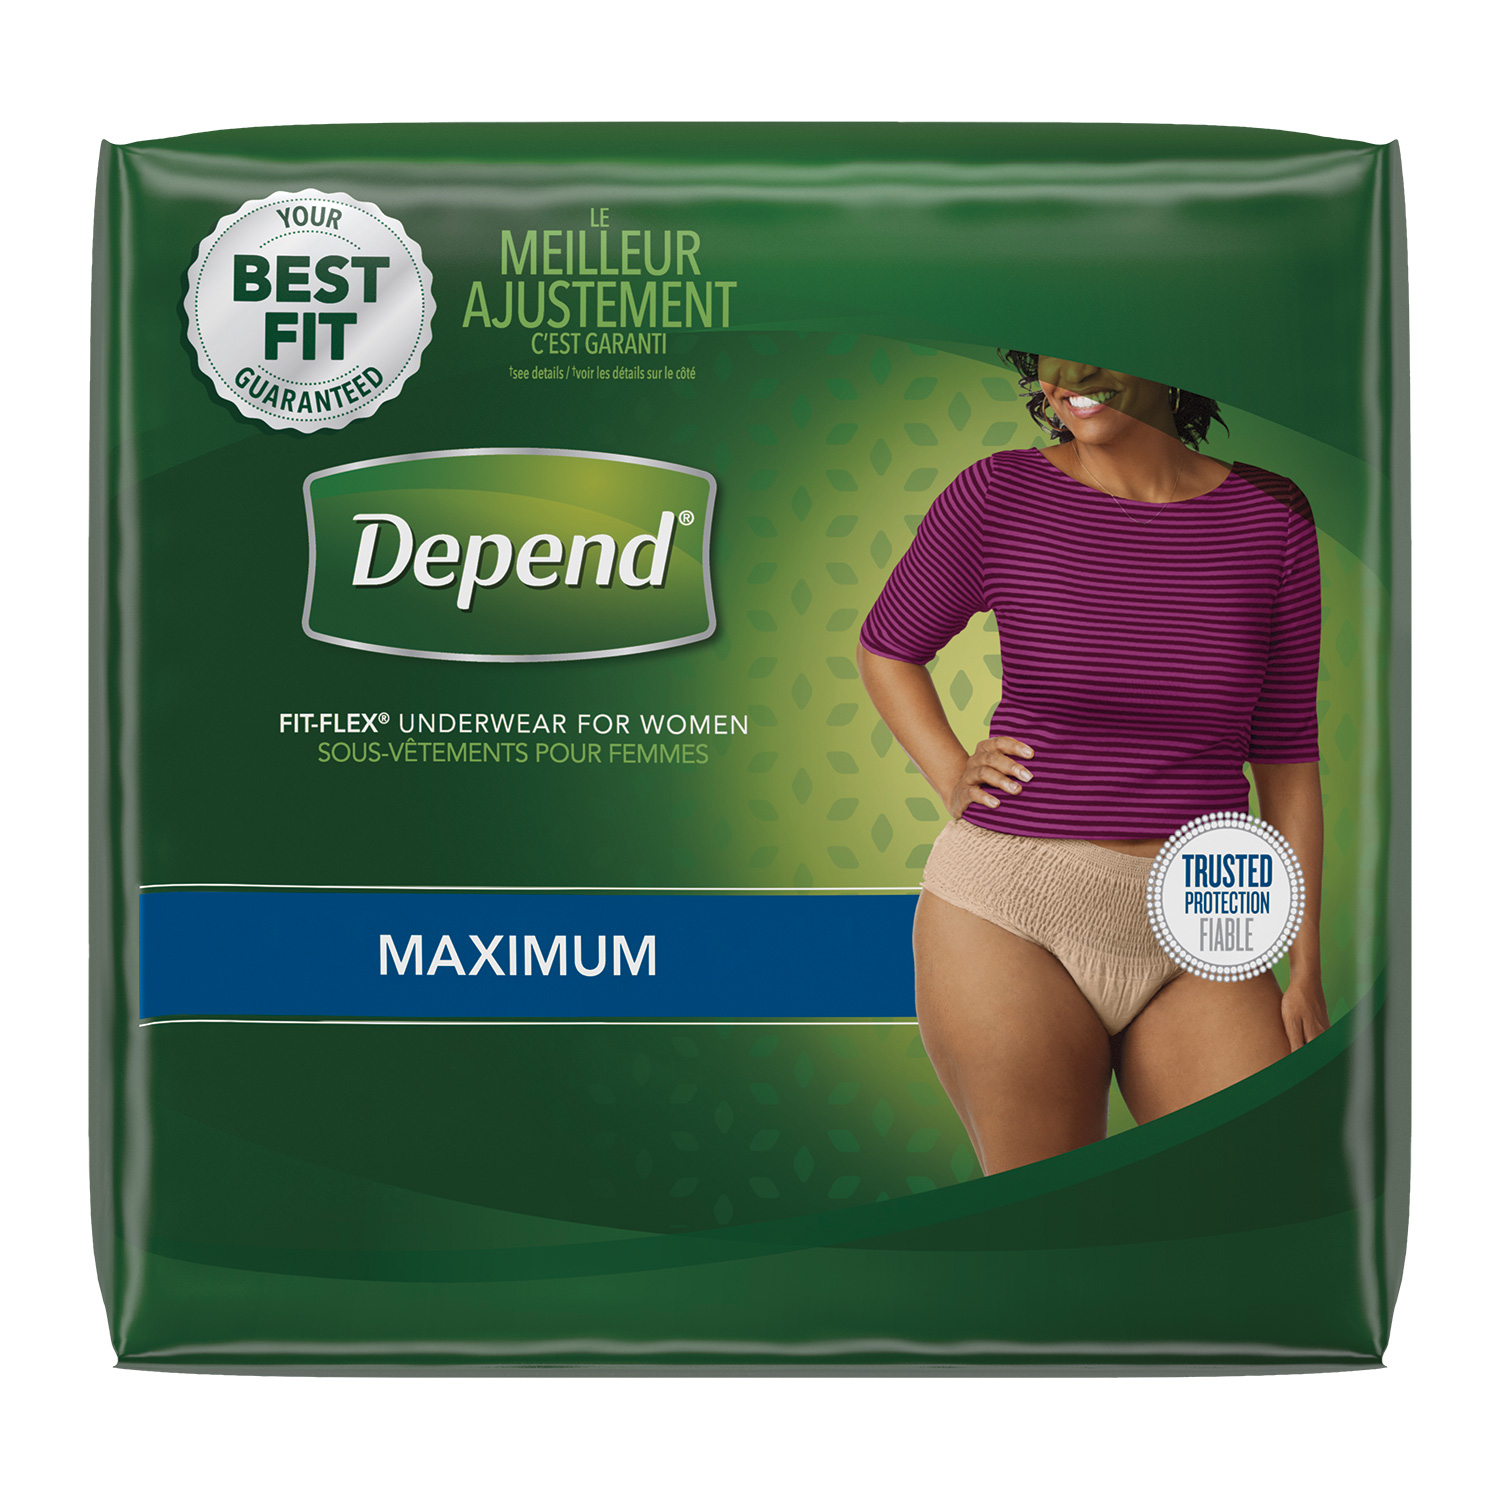 Printable Coupons For Depends Undergarments Printable World Holiday